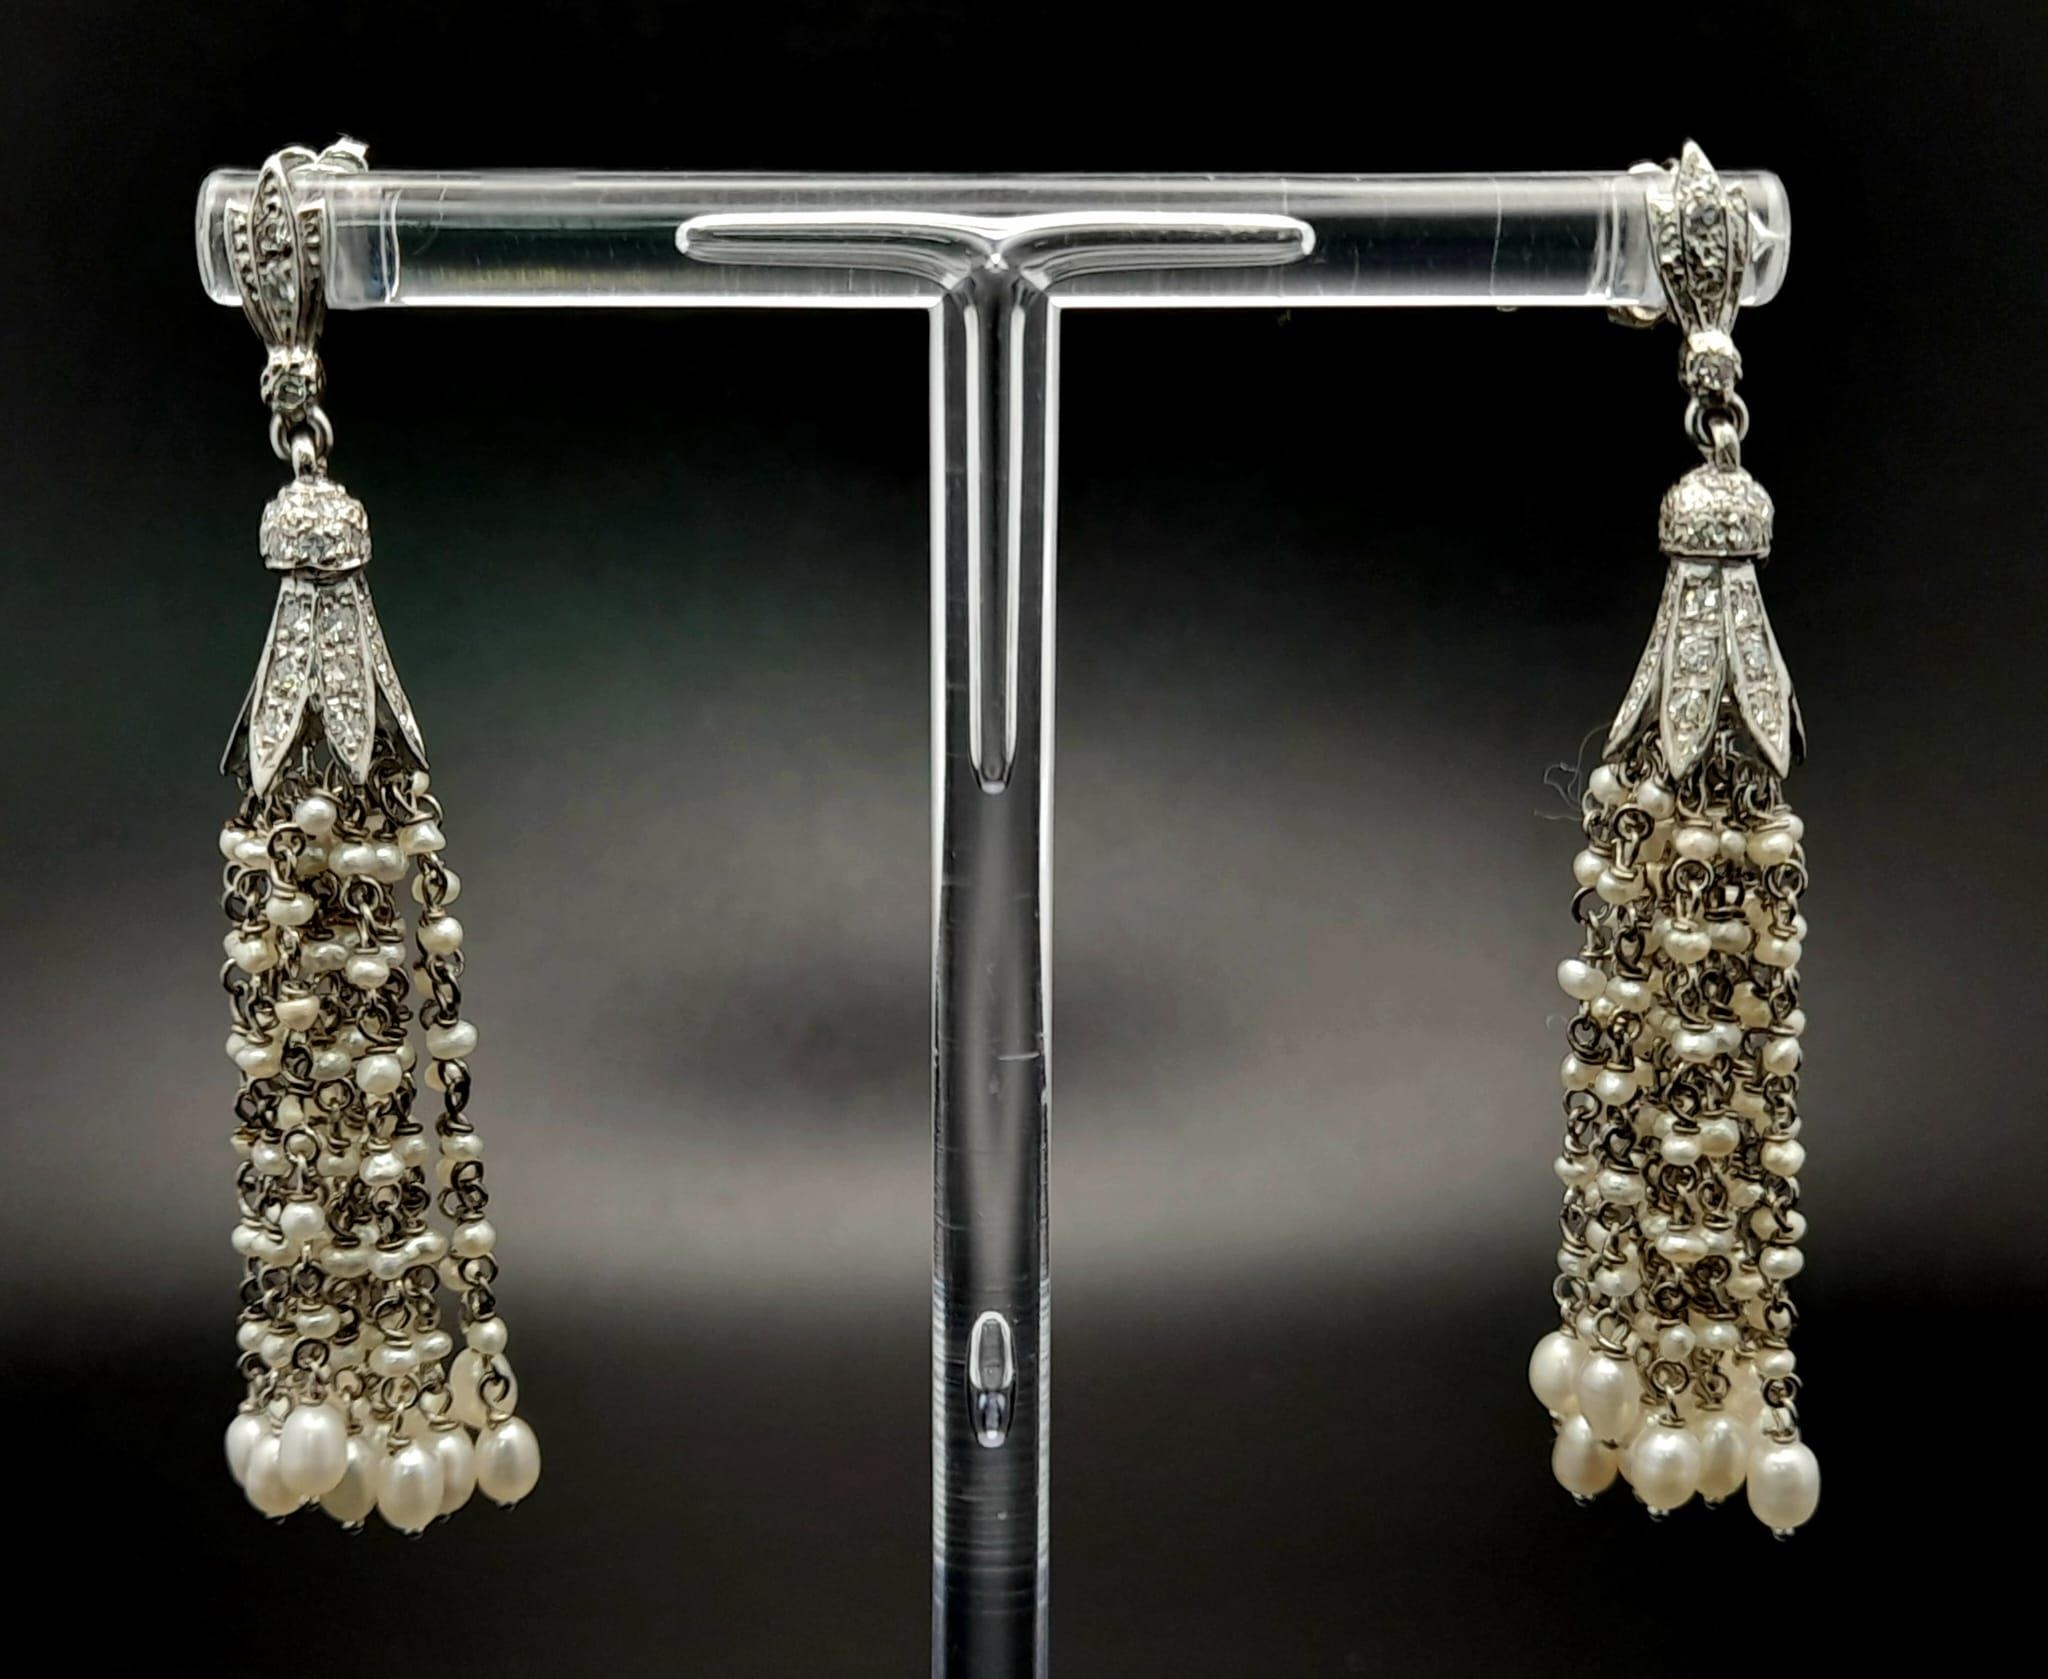 A Pair of Unique Hand-Made 18K White gold, Diamond and Seed Pearl Drop Earrings. Art Deco